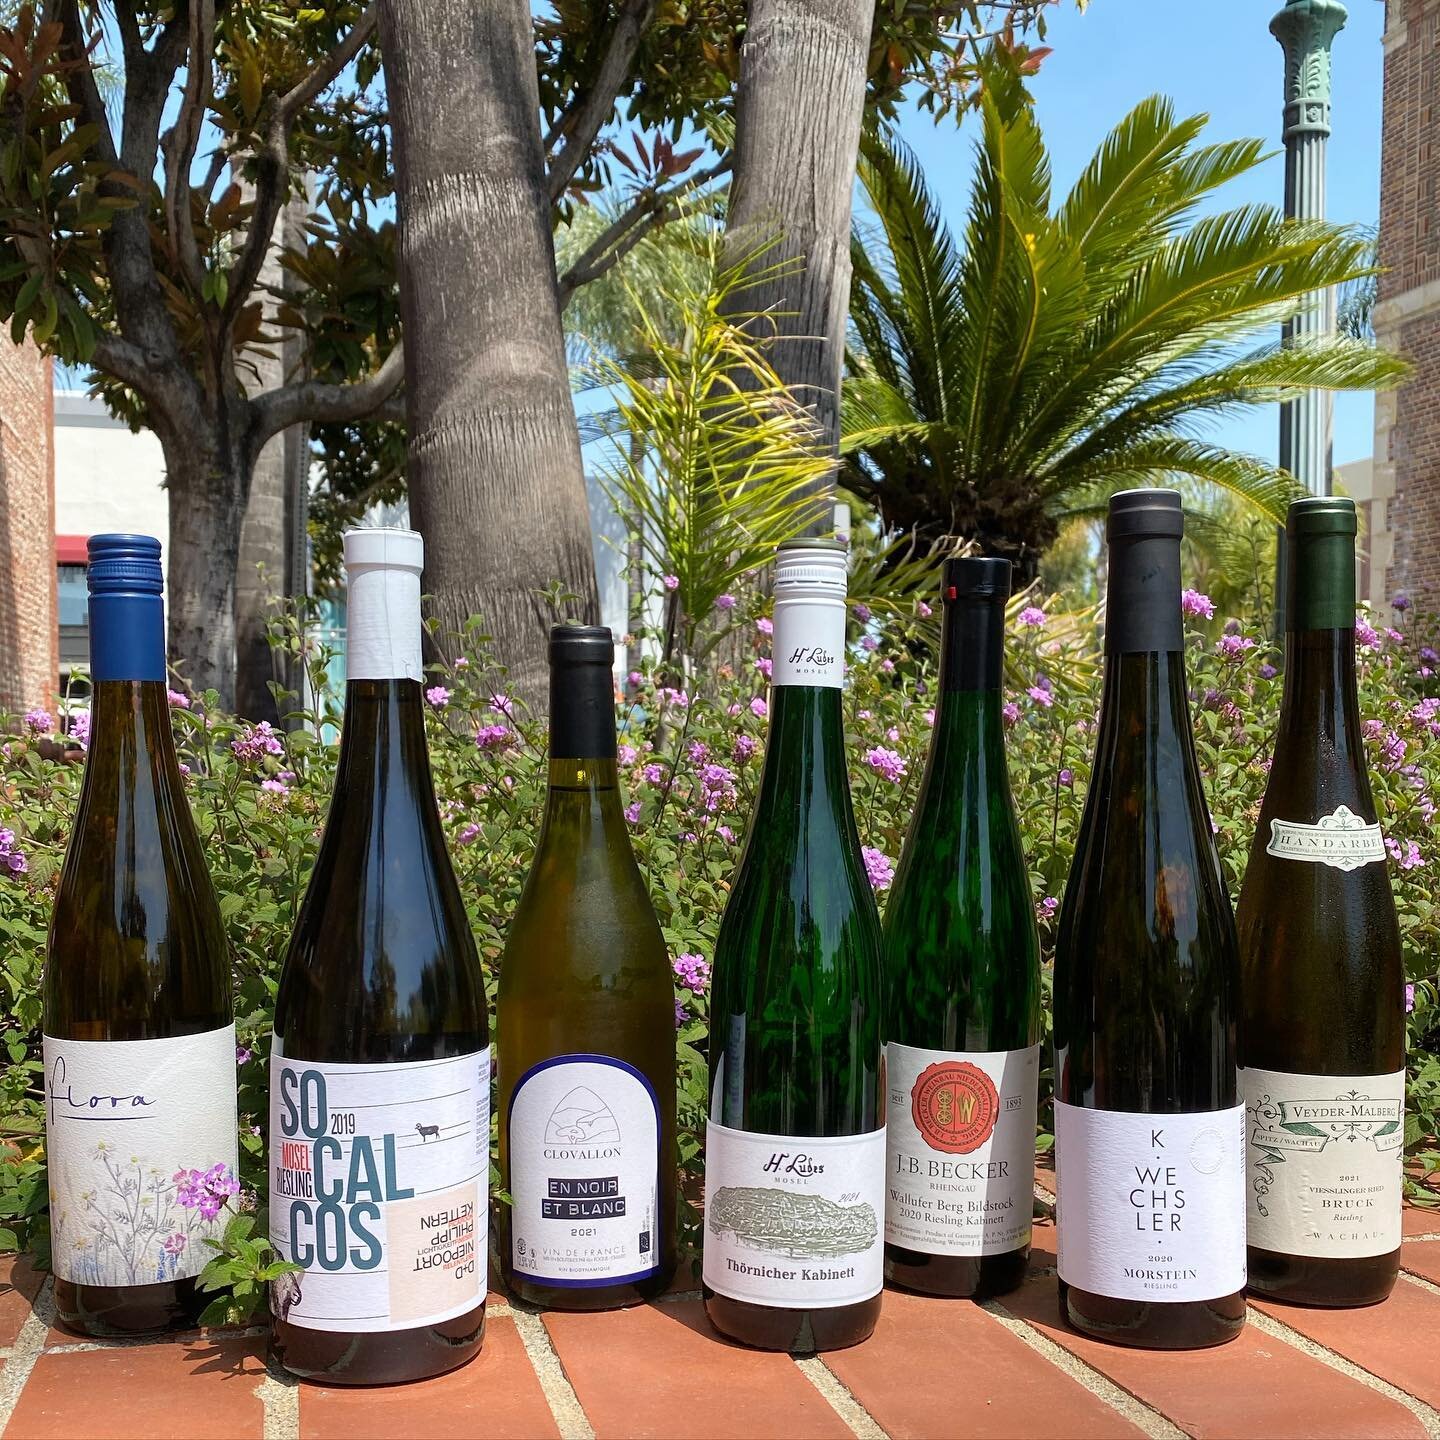 The weather is getting HOT 🥵, and we wanted to give you some advice on how to beat the heat: Drink more Riesling!

It has the ability to cut through the California sunshine and bring you to a cooler place (like the vineyards of the Mosel). 

The com